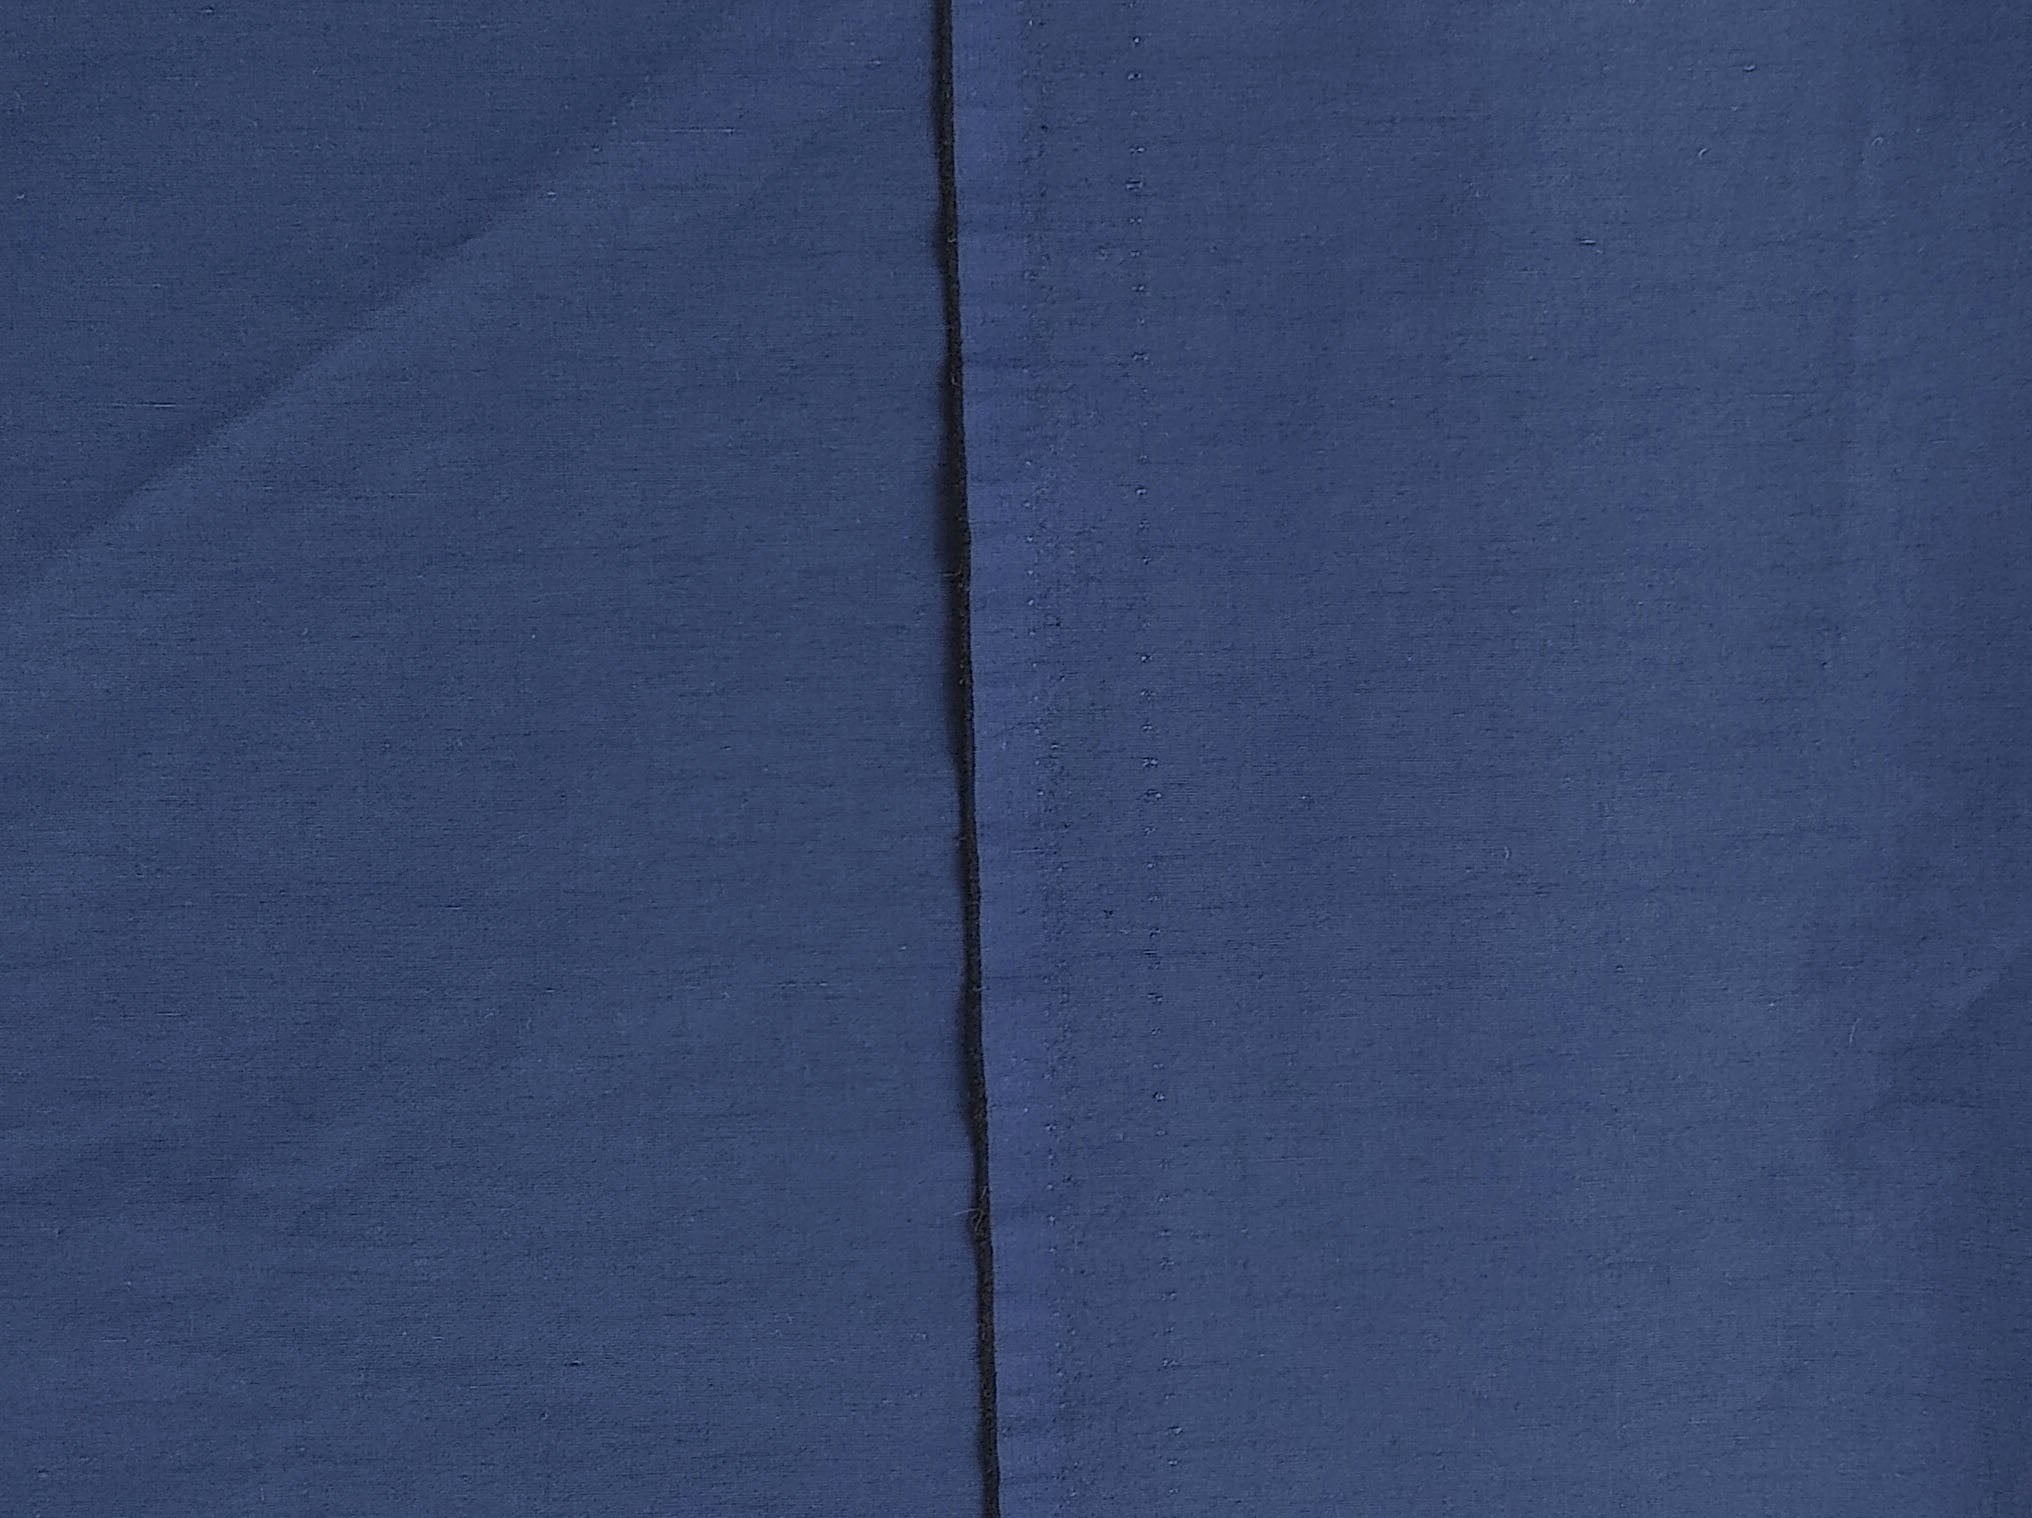 Ultimate Comfort: Warp Stretch Fabric Blend of Linen, Cotton, Nylon, and Spandex 7816 - The Linen Lab - Navy